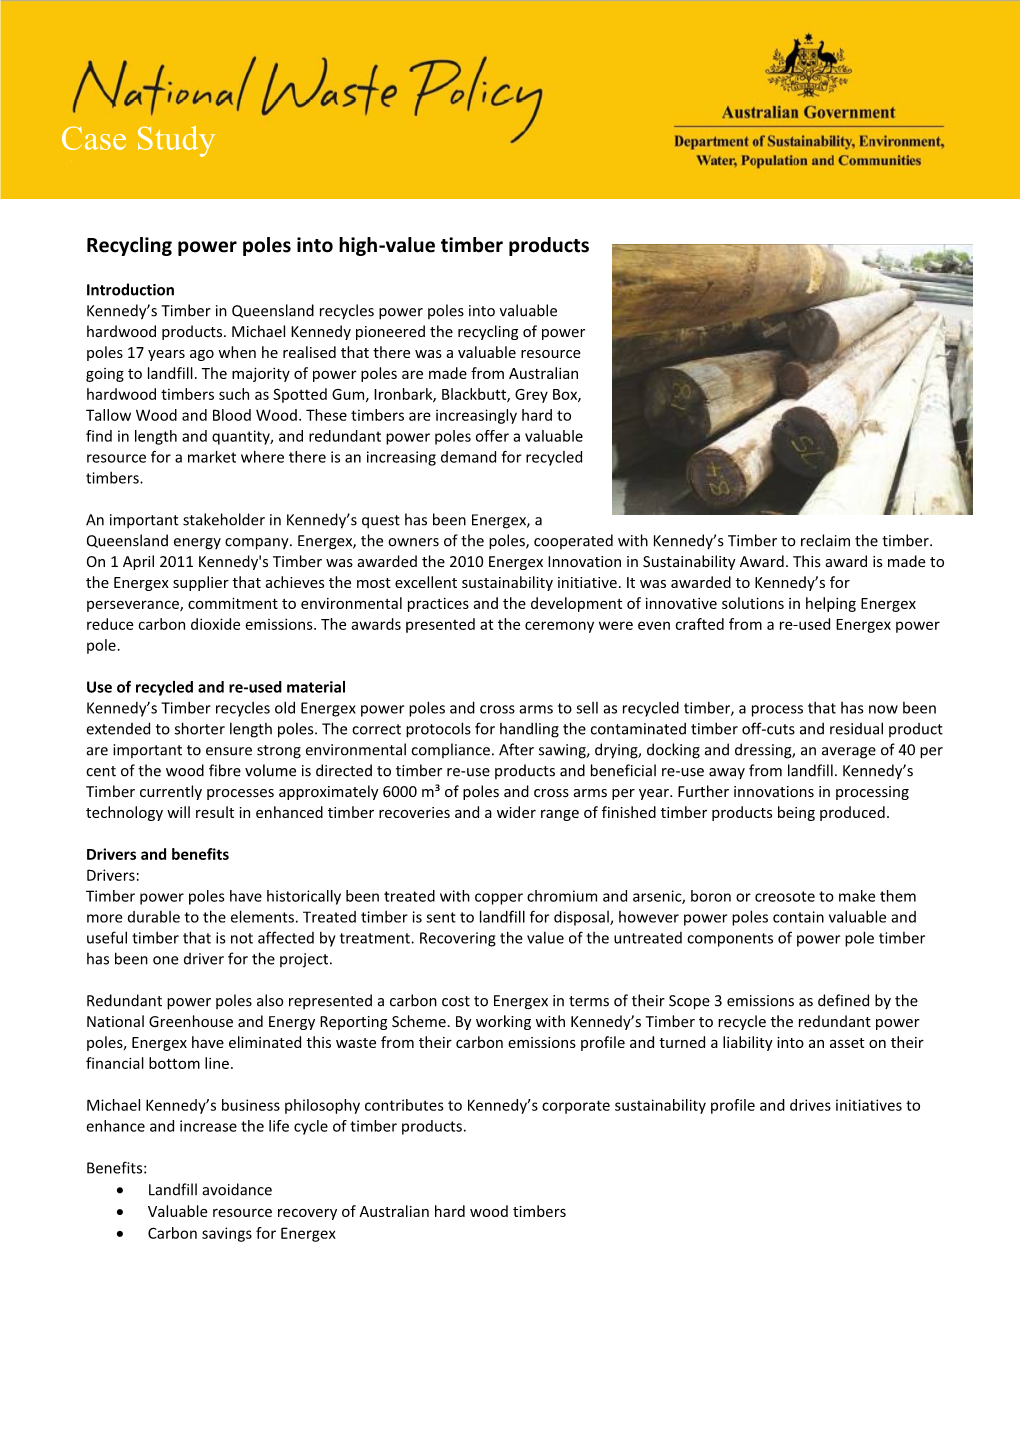 Recycling Power Poles Into High-Value Timber Products